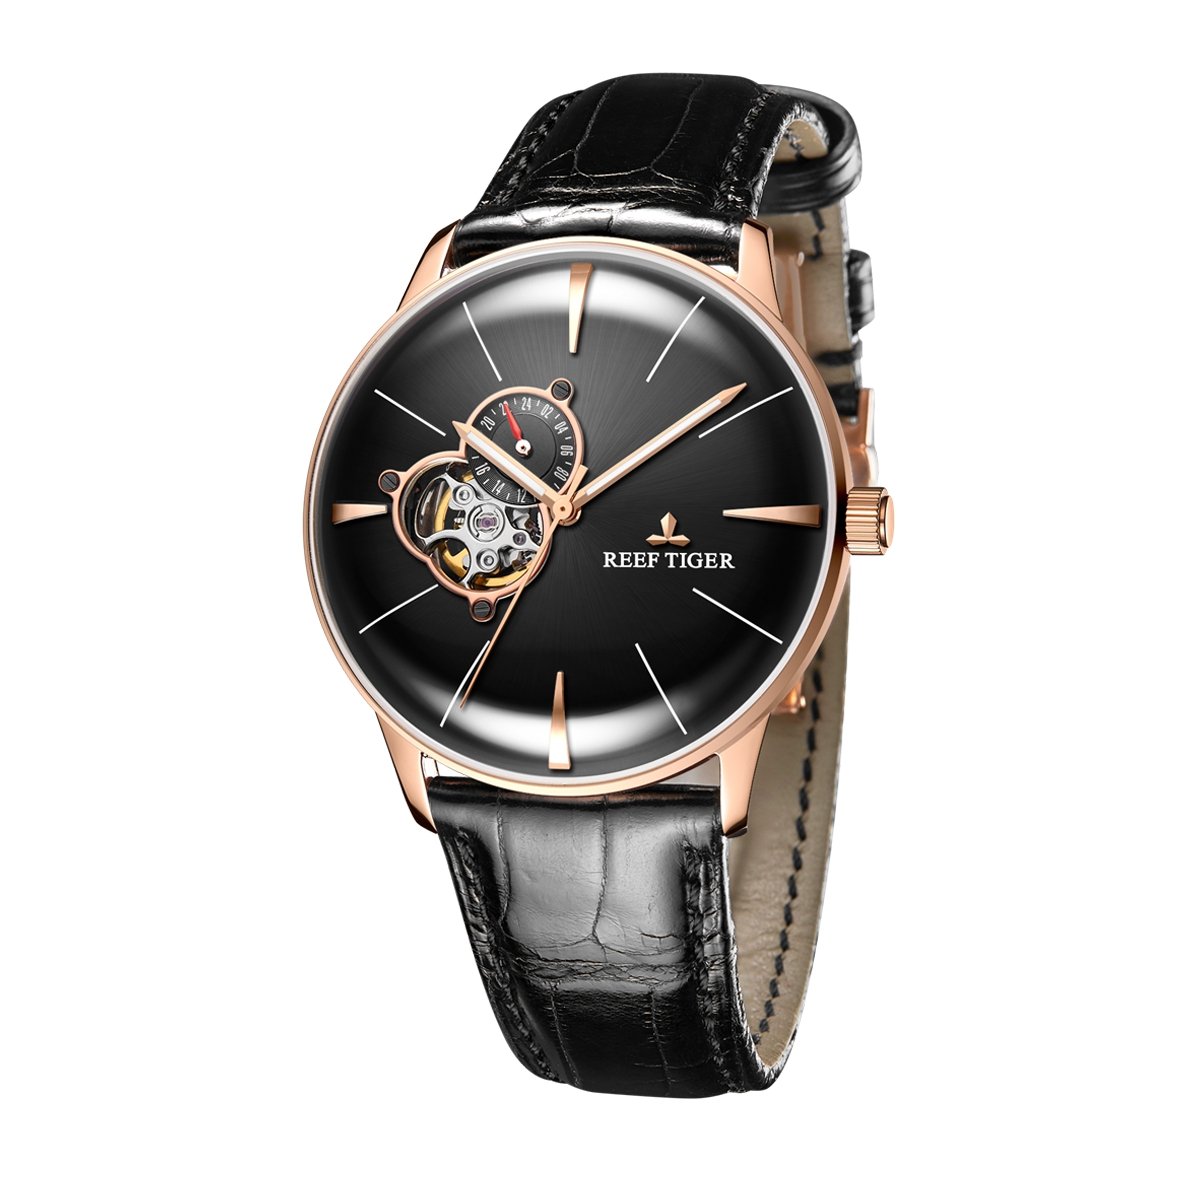 REEF TIGER Luxury Automatic Watches Mens Genuine Leather Strap Rose Gold Convex Lens Watches RGA8239